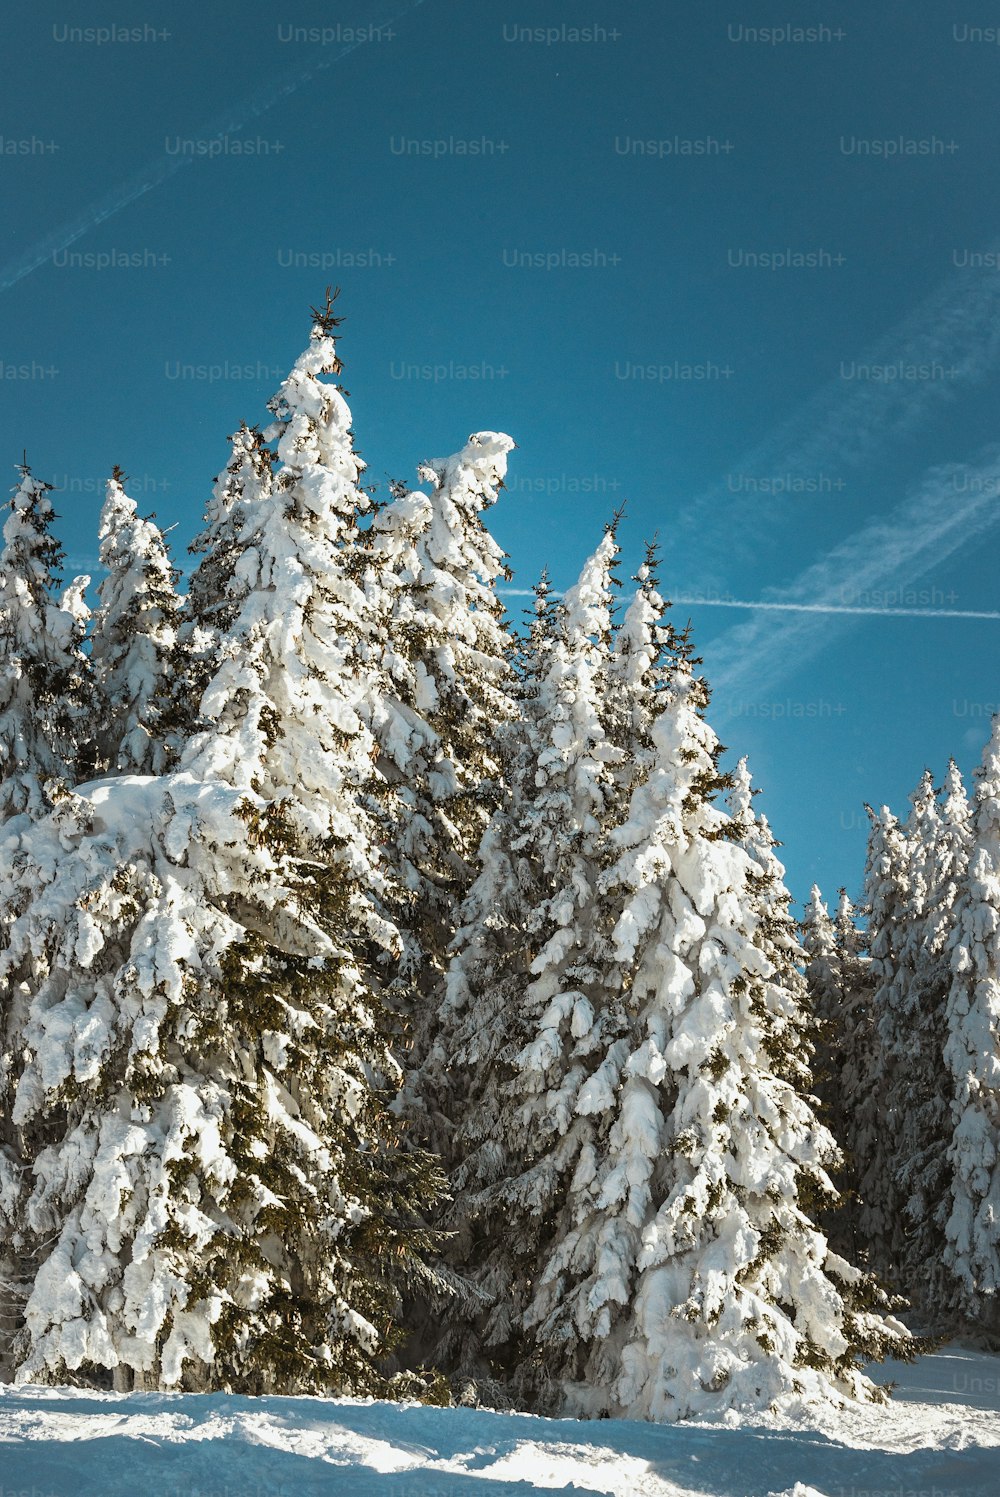 a person on skis in the snow near some trees